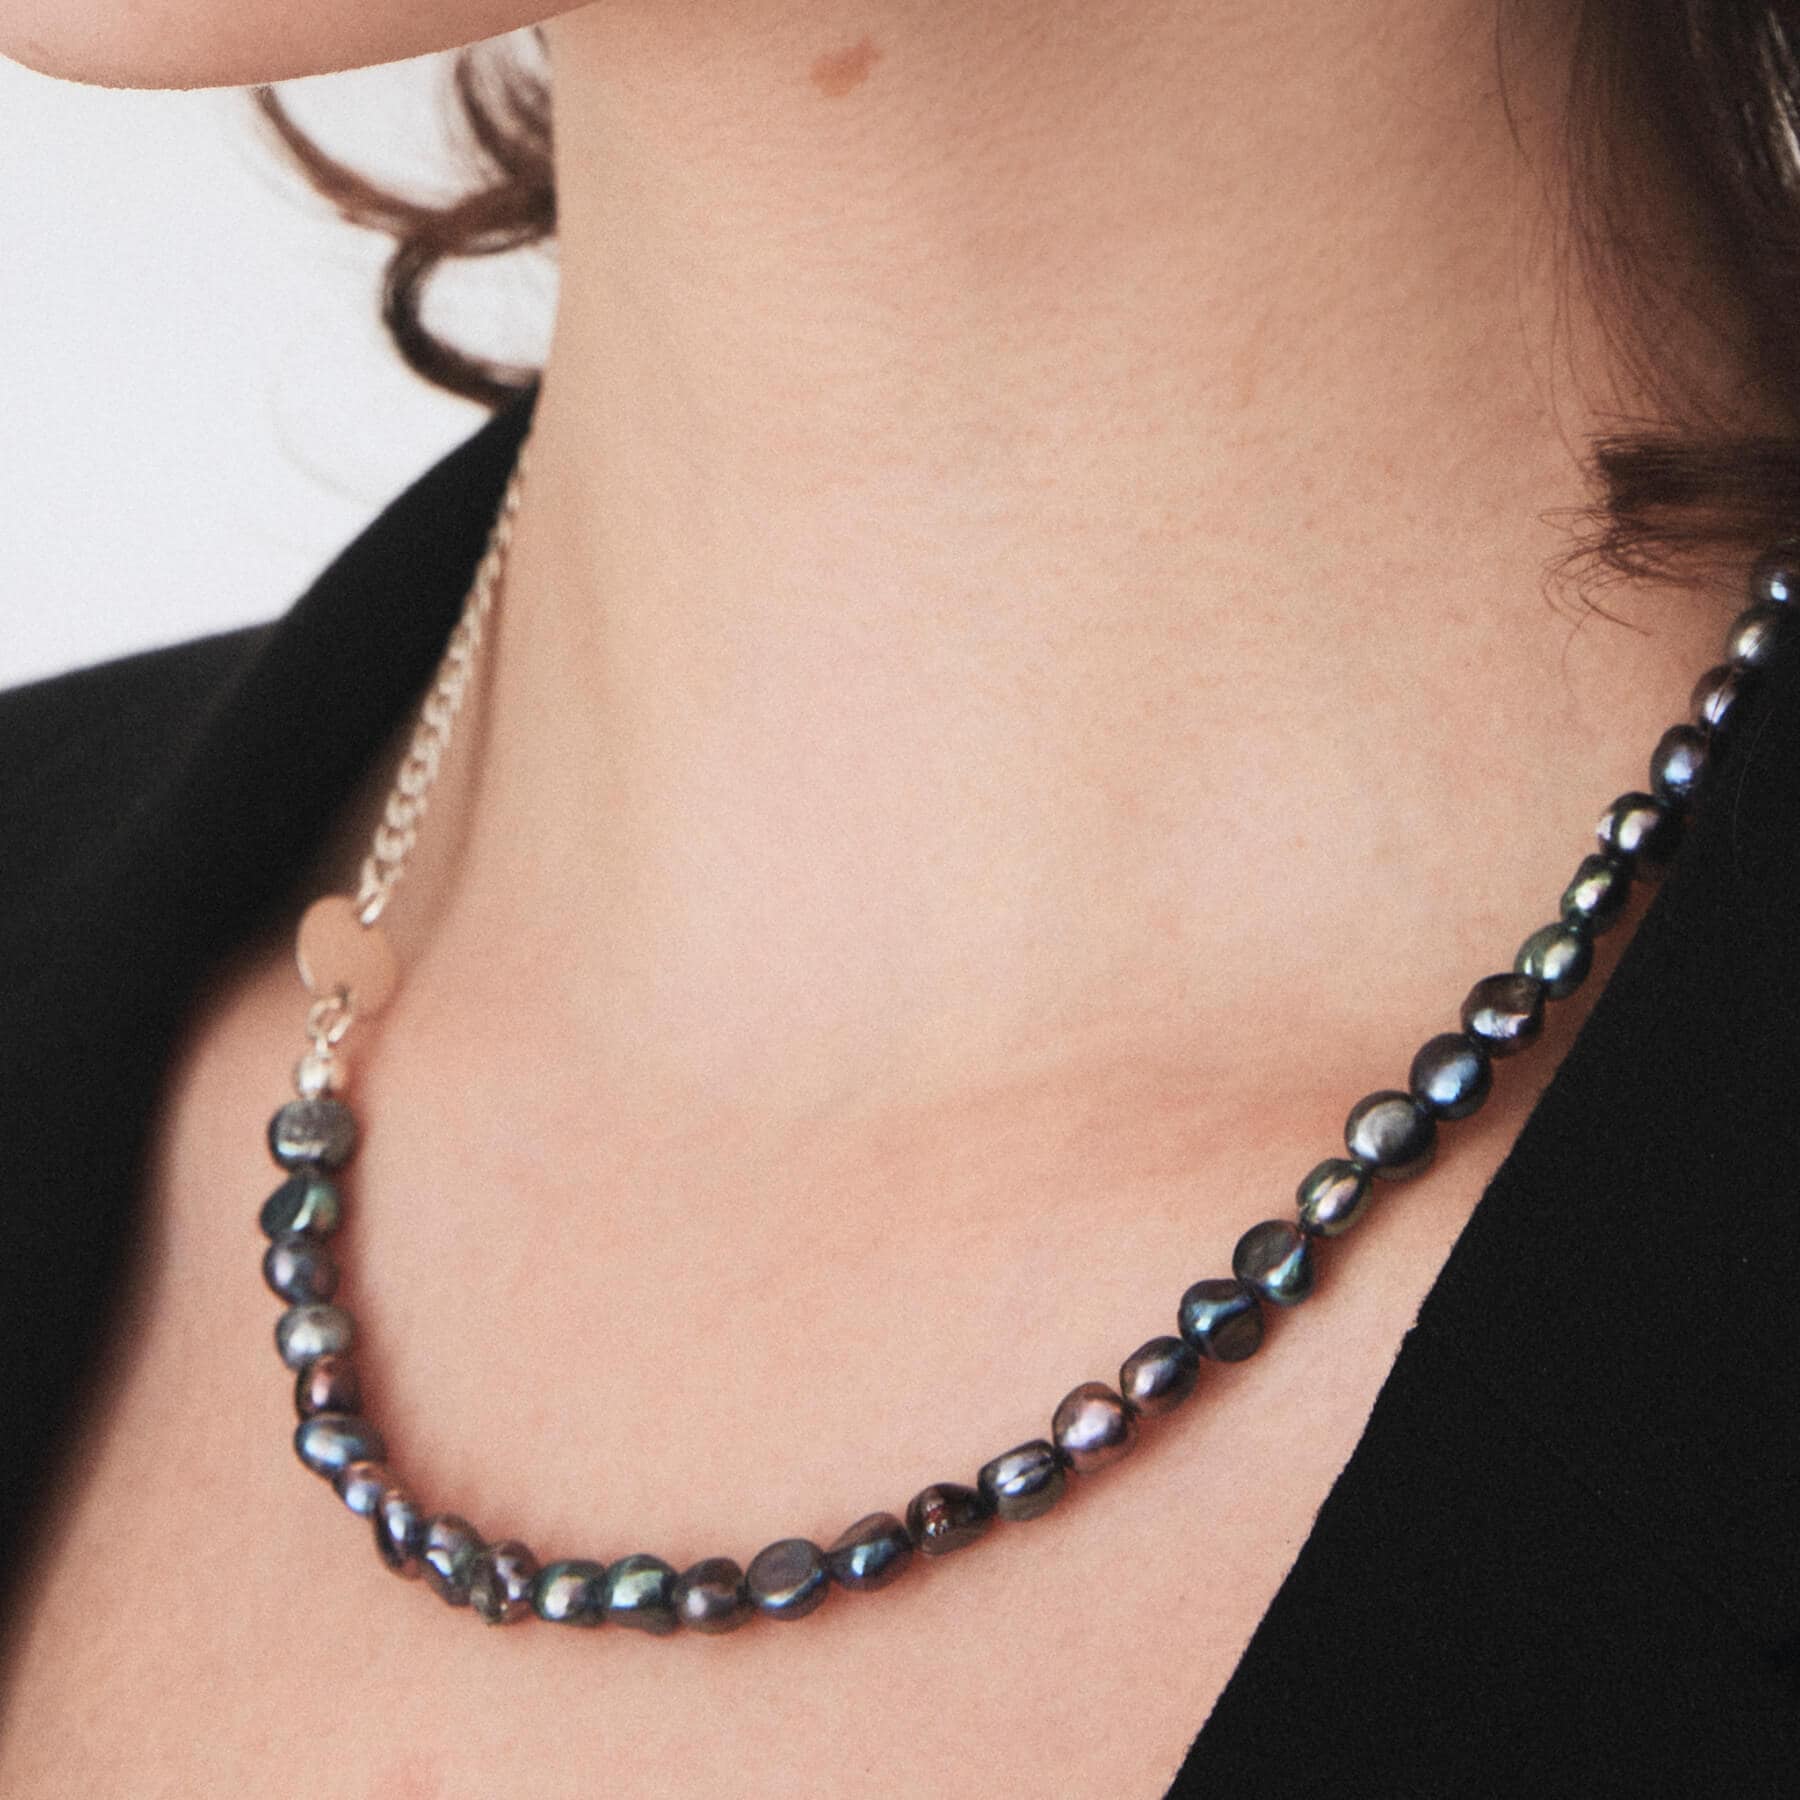 Black pearl necklace with silver chain  on model